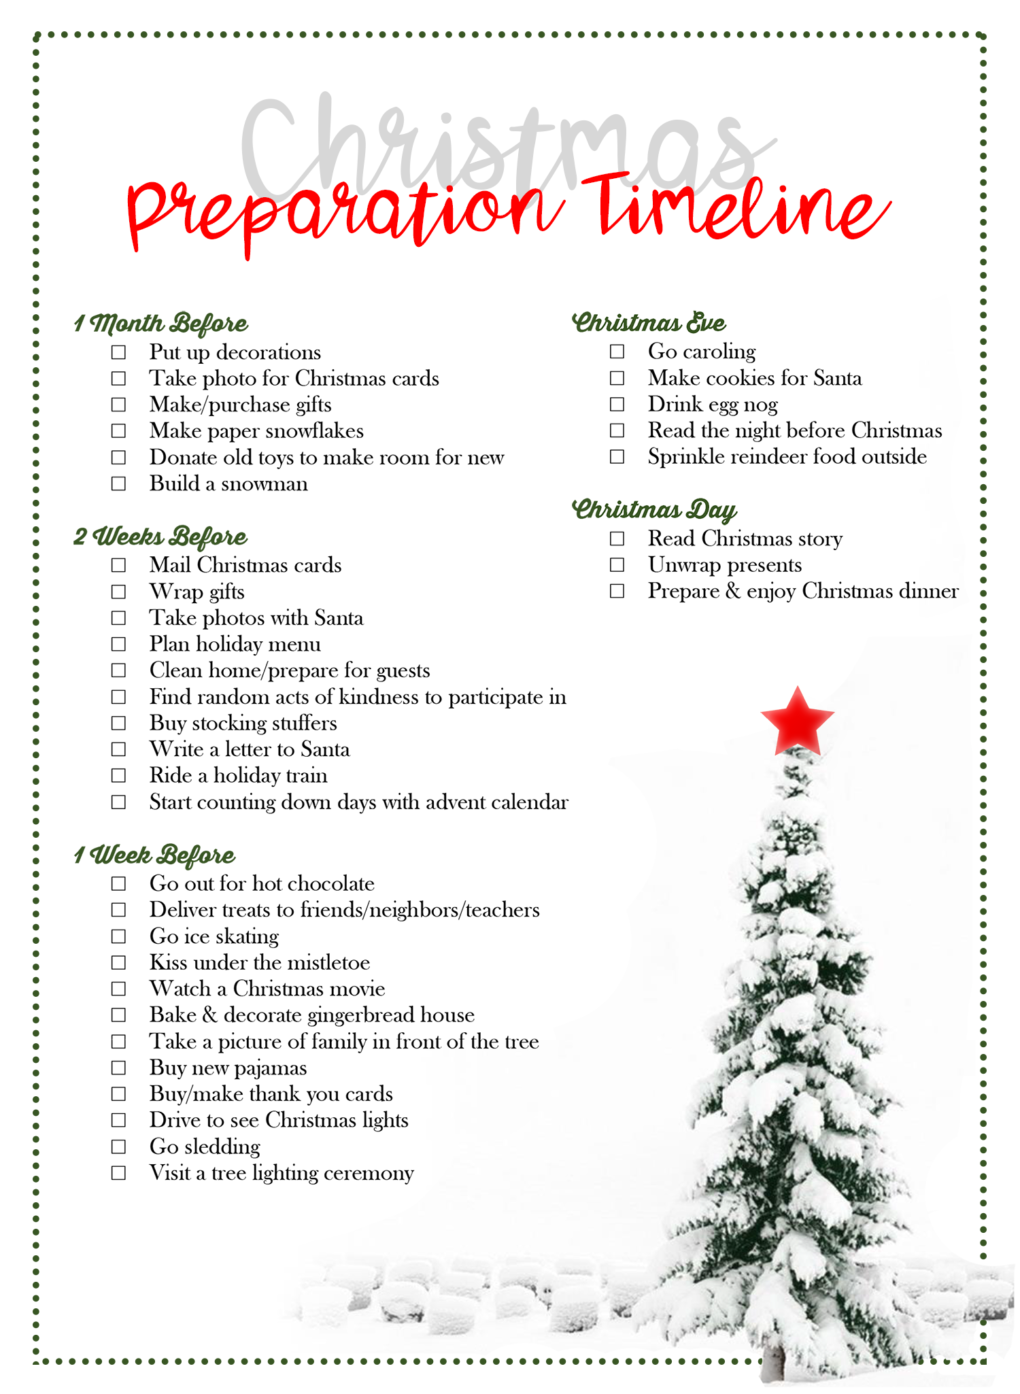 Christmas Preparation Timeline by Laurel Smith The DIY Lighthouse